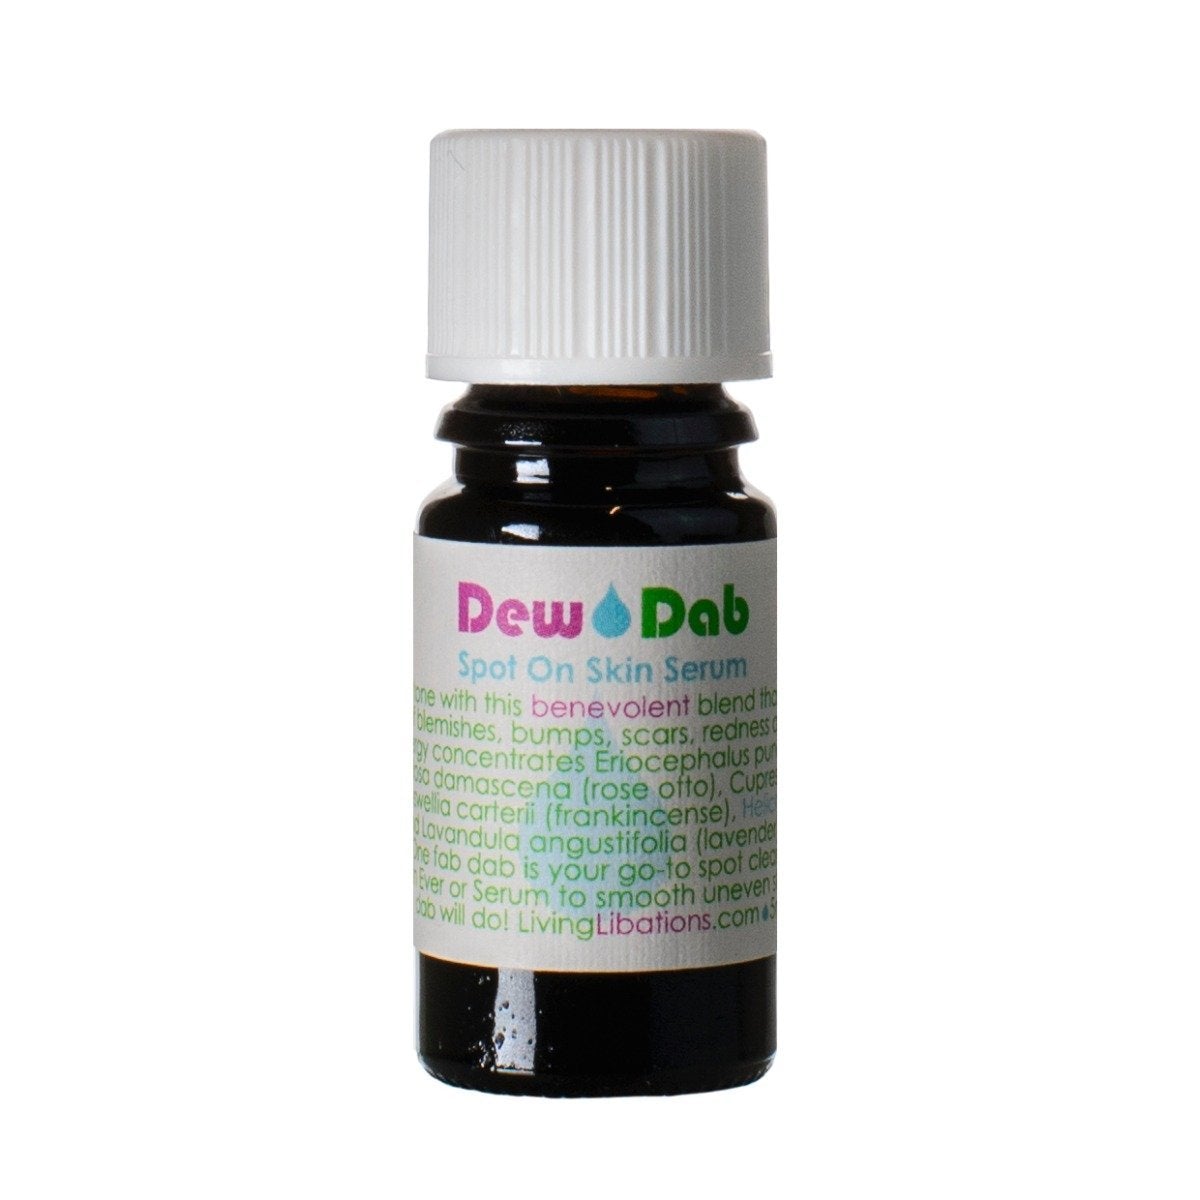 DewDab (5ml) | Living Libations | Raw Living UK | Living Libation&#39;s DewDab: a Vegan, Natural &amp; Pure blend to revitalise &amp; strengthen the skin. This fortifying emollient quenches lacklustre, dry skin.